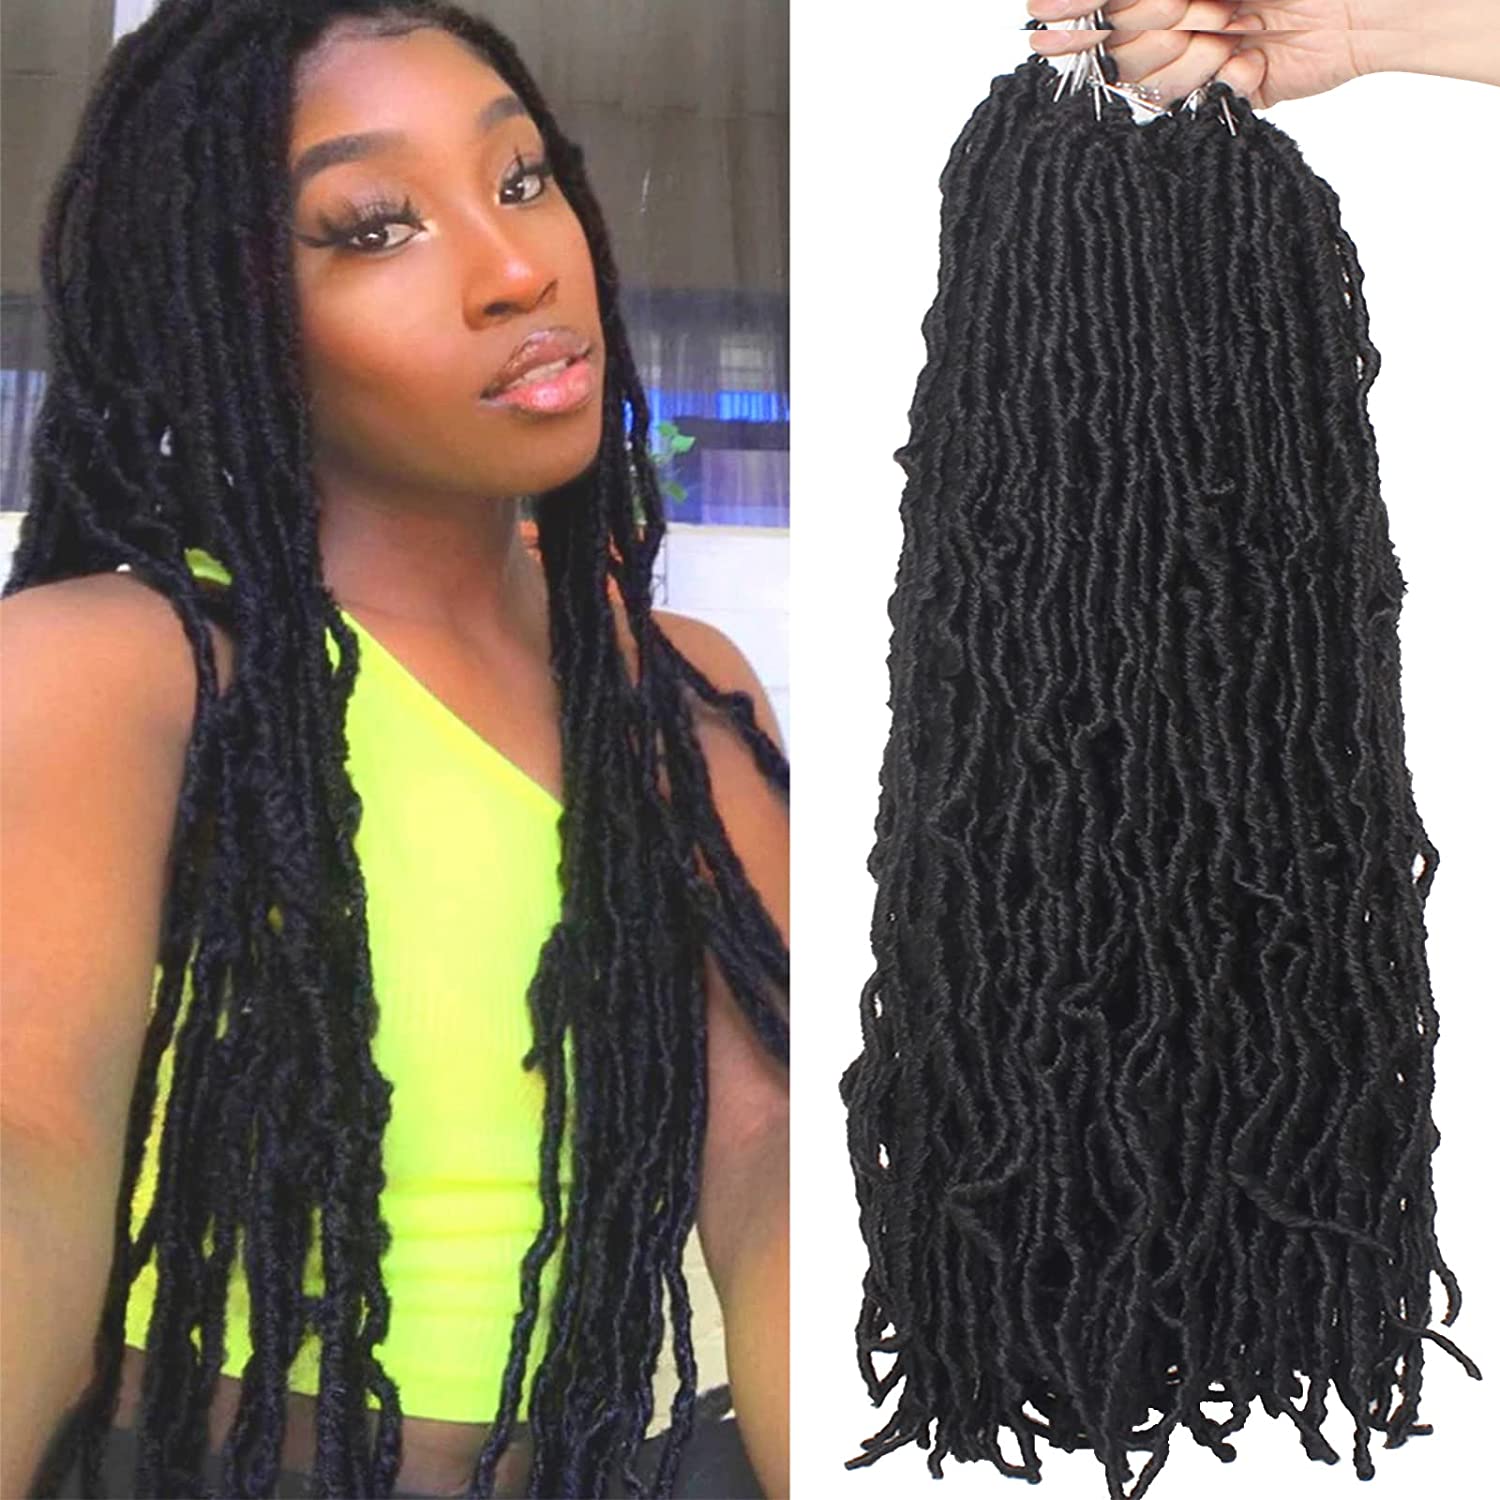 21 Pack Of 18/24 Inch Nu Faux Locs Crochet Hair With African Goddess Faux  Locs Braids For Black Women, Girls Curly Wavy Style LS25 From Lanshair,  $3.12